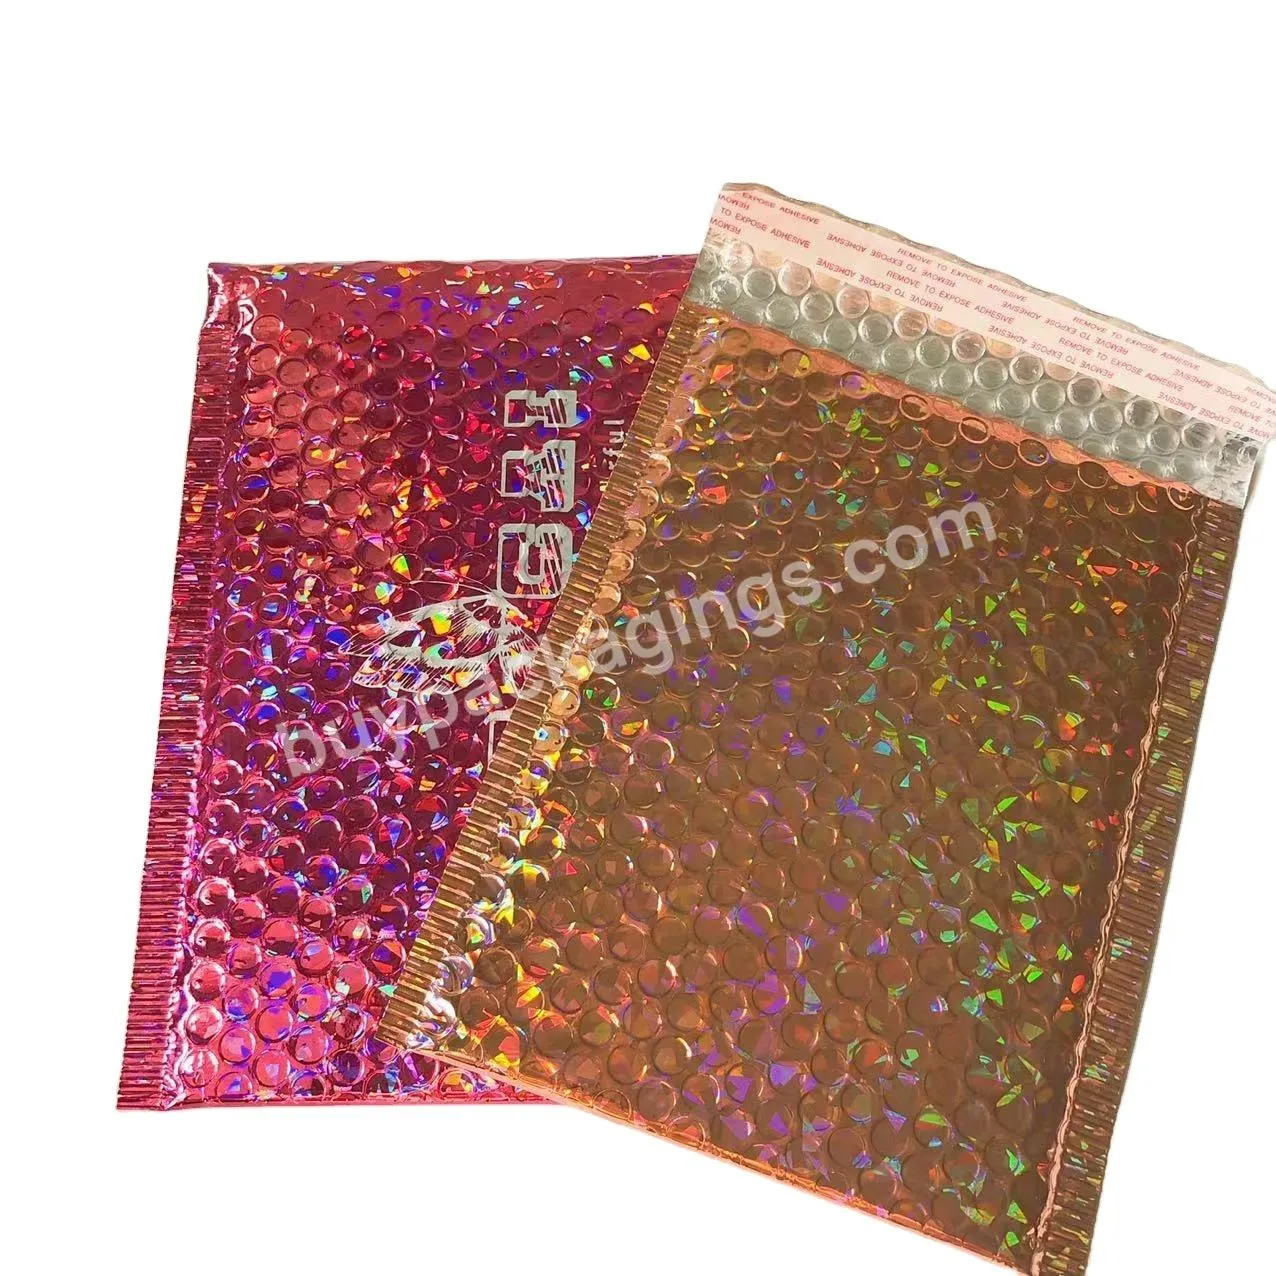 Custom Recyclable Shipping Bubble Mailer Bag Waterproof Rose Red Packaging Mailing Bag Envelope Poly Bubble Bags - Buy Recyclable Bubble Mailer,Bubble Bags,Bubble Envelope.